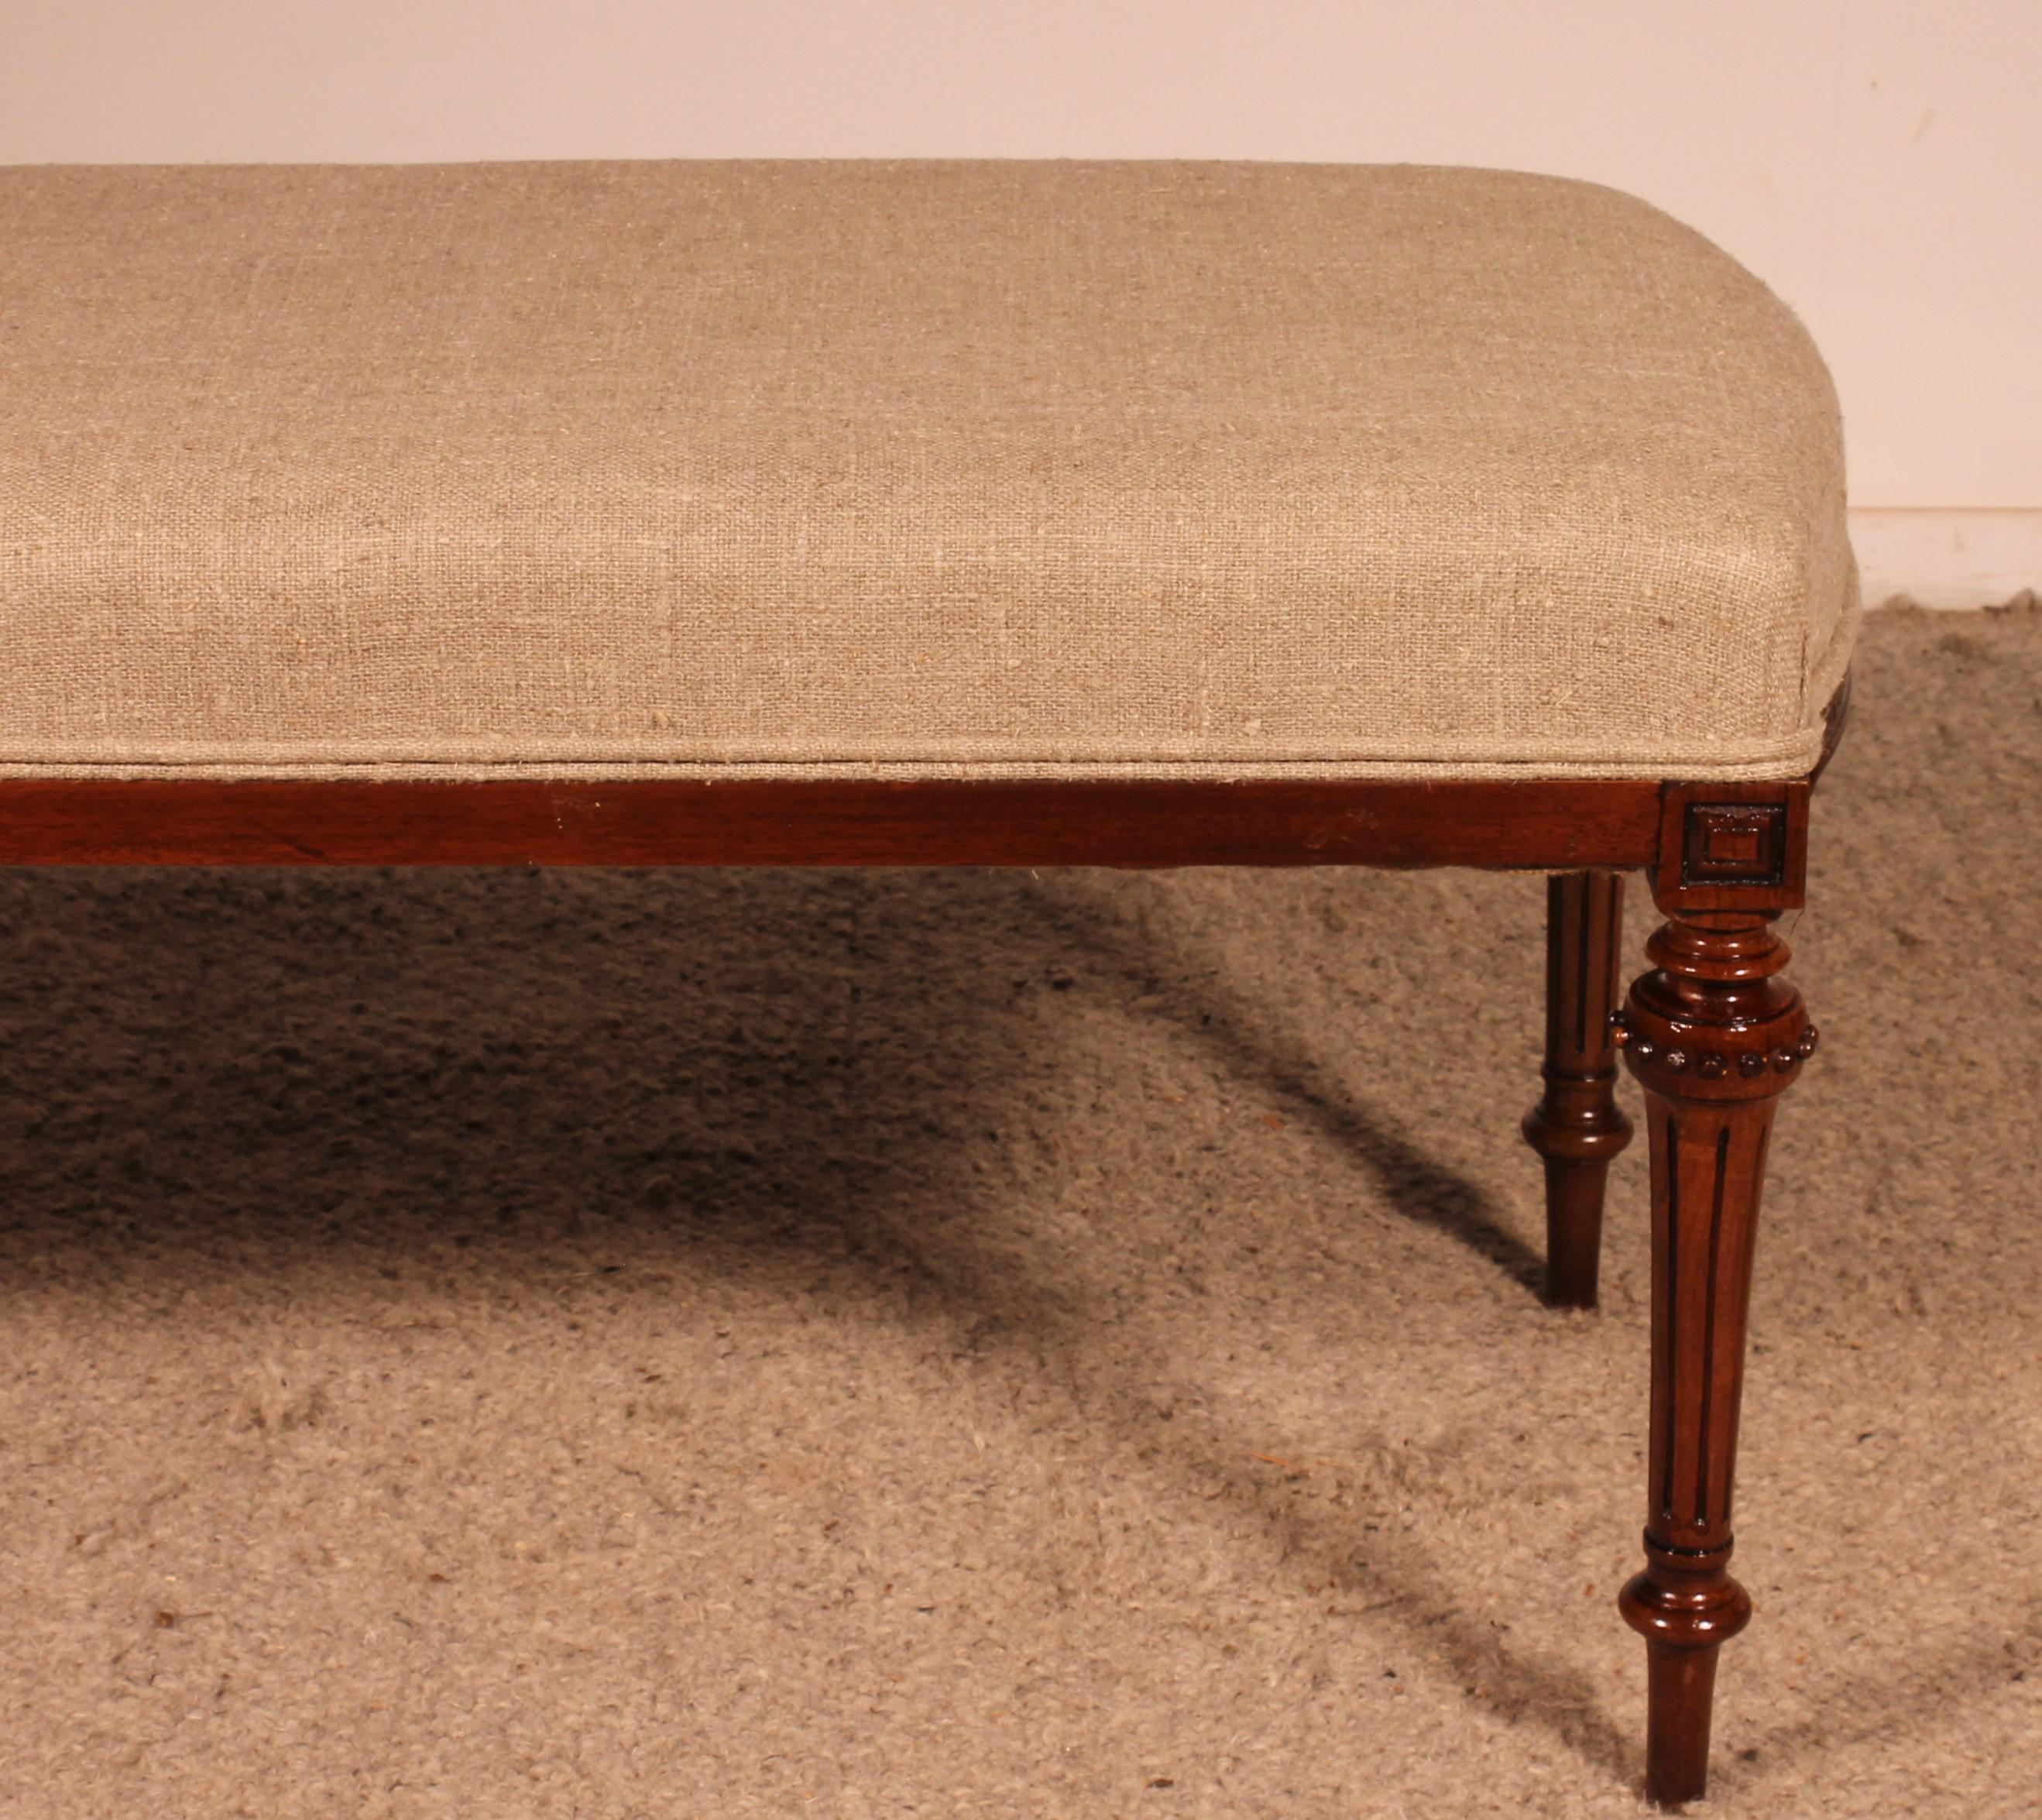 lovely mahogany bench from the 19th century from England

Very beautiful mahogany base with a small medallions and round corners

The bench has been covered with a beige line fabric

beautiful patina and in perfect condition